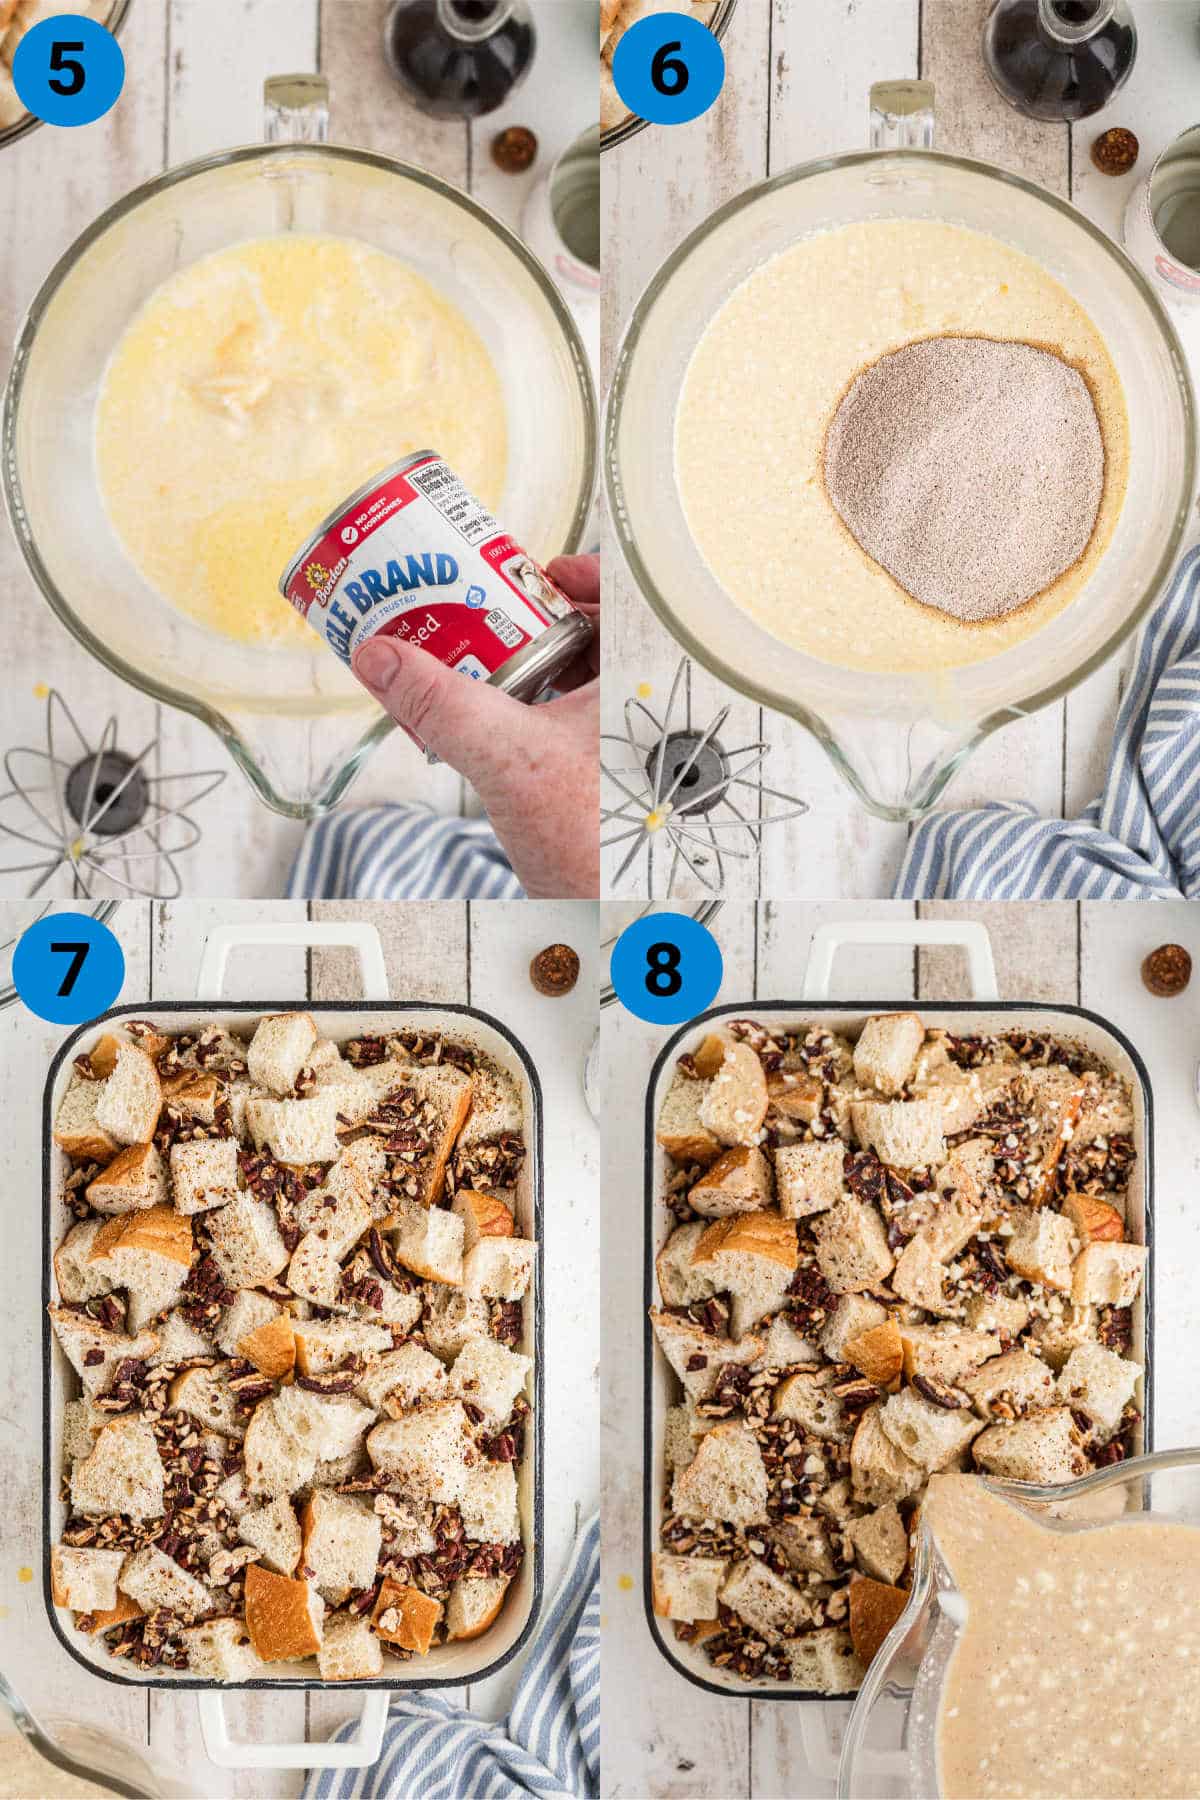 A collage of four images showing how to make bread pudding, recipe steps 5 through 8.